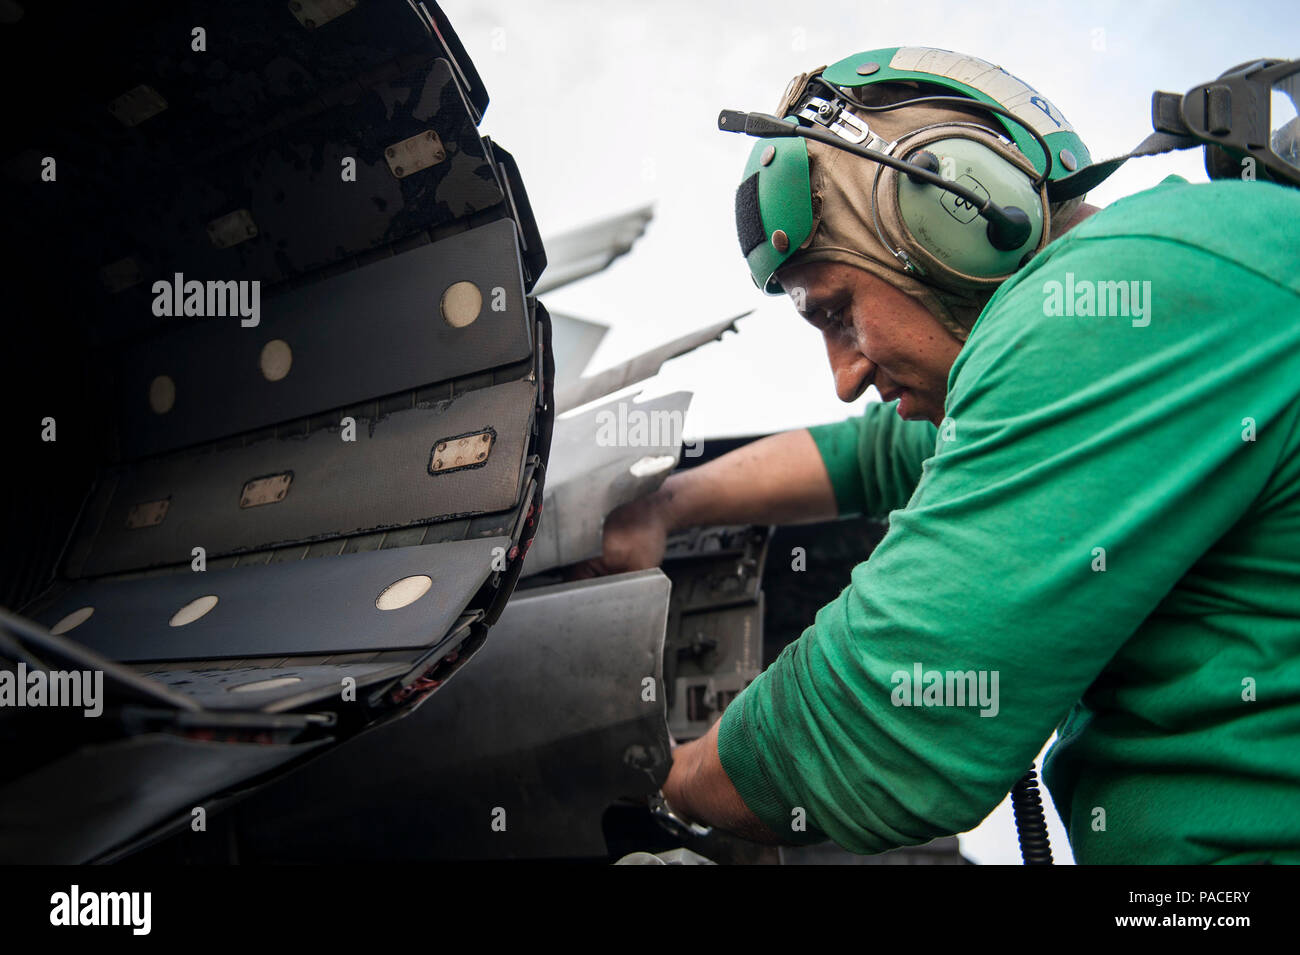 160311-N-MQ094-100 ARABIAN GULF (March 11, 2016) Aviation Machinist's Mate 1st Class Joel Perez, assigned to the “Jolly Rogers” of Strike Fighter Squadron (VFA) 103, conducts maintenance on an F/A-18F Super Hornet on the flight deck of aircraft carrier USS Harry S. Truman (CVN 75). Harry S. Truman Carrier Strike Group is deployed in support of Operation Inherent Resolve, maritime security operations, and theater security cooperation efforts in the U.S. 5th Fleet area of operations. (U.S. Navy photo by Mass Communication Specialist 2nd Class Ethan T. Miller/Released) Stock Photo